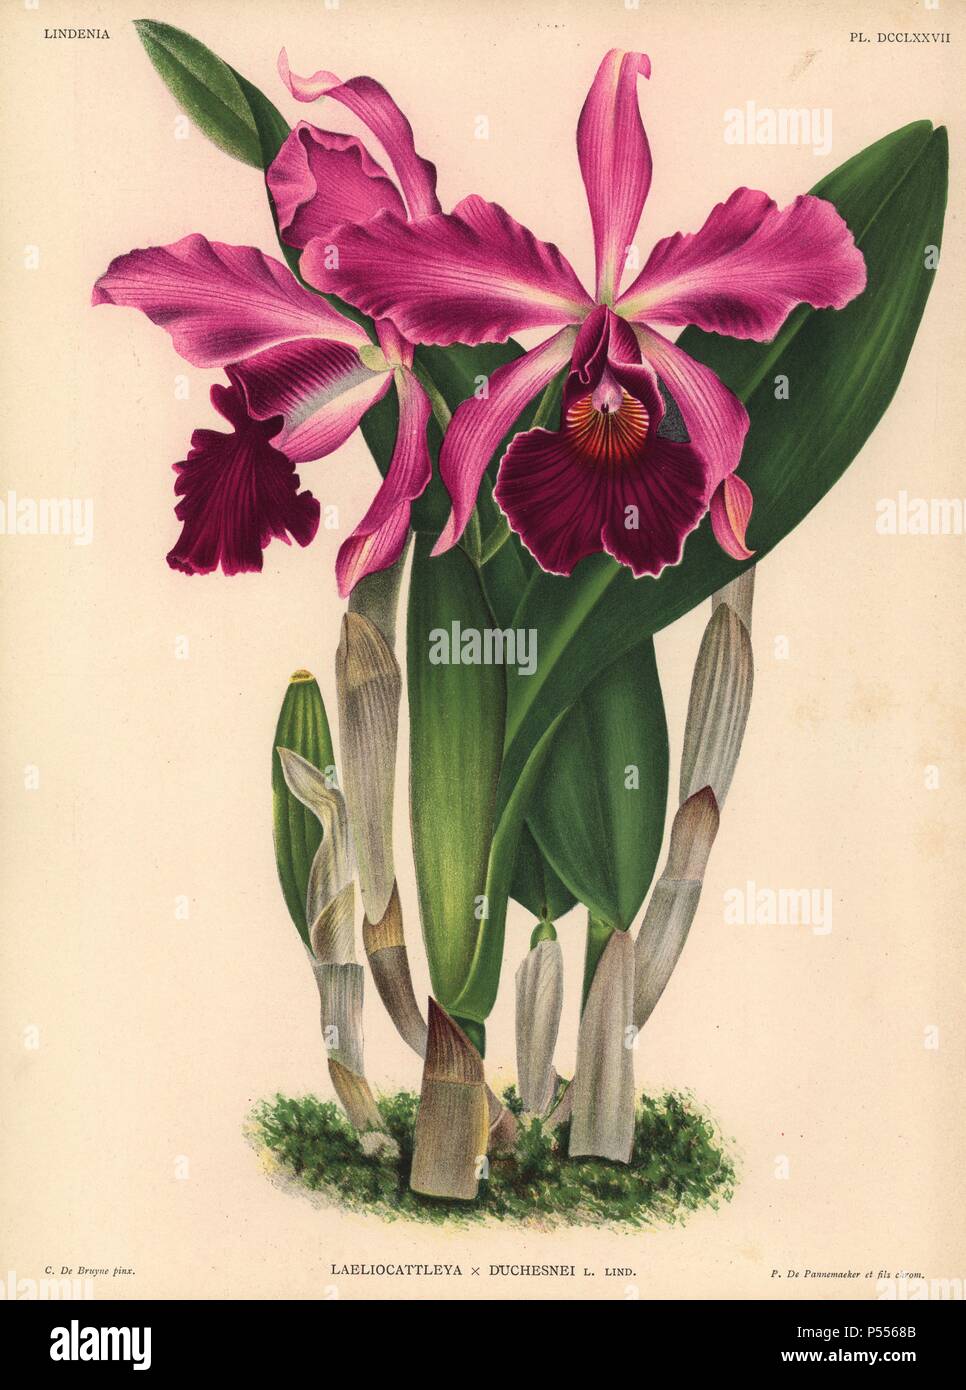 Laeliocattleya x Duchesnei L. Lind. hybrid orchid. Illustration drawn by C. de Bruyne and chromolithographed by P. de Pannemaeker et fils from Lucien Linden's 'Lindenia, Iconographie des Orchidees,' Brussels, 1902. Stock Photo